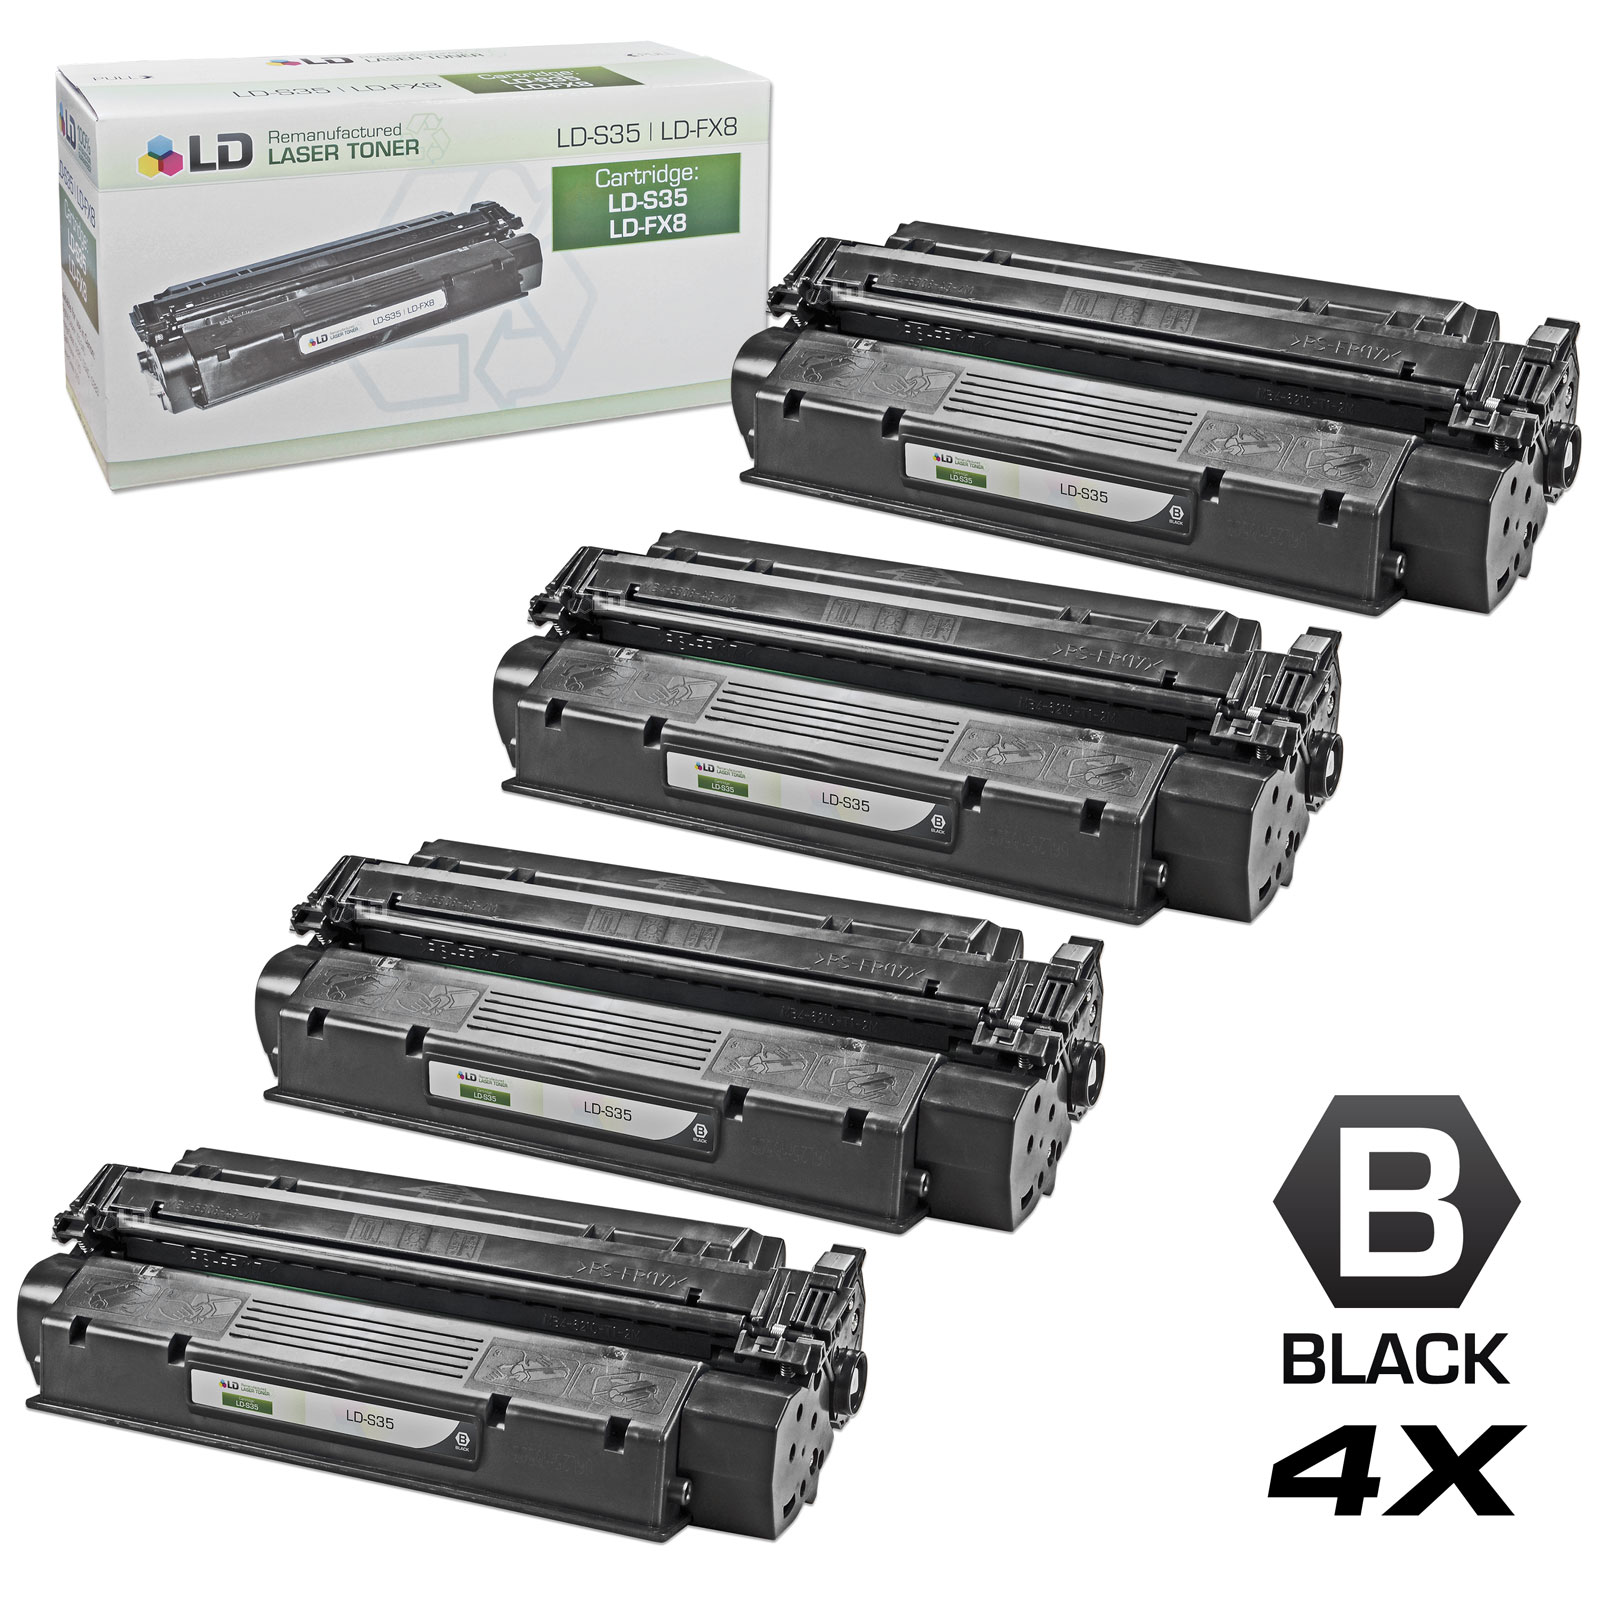 LD Canon Remanufactured S35 (7833A001AA) Set of 4 Black Laser Toner Cartridges - image 1 of 1